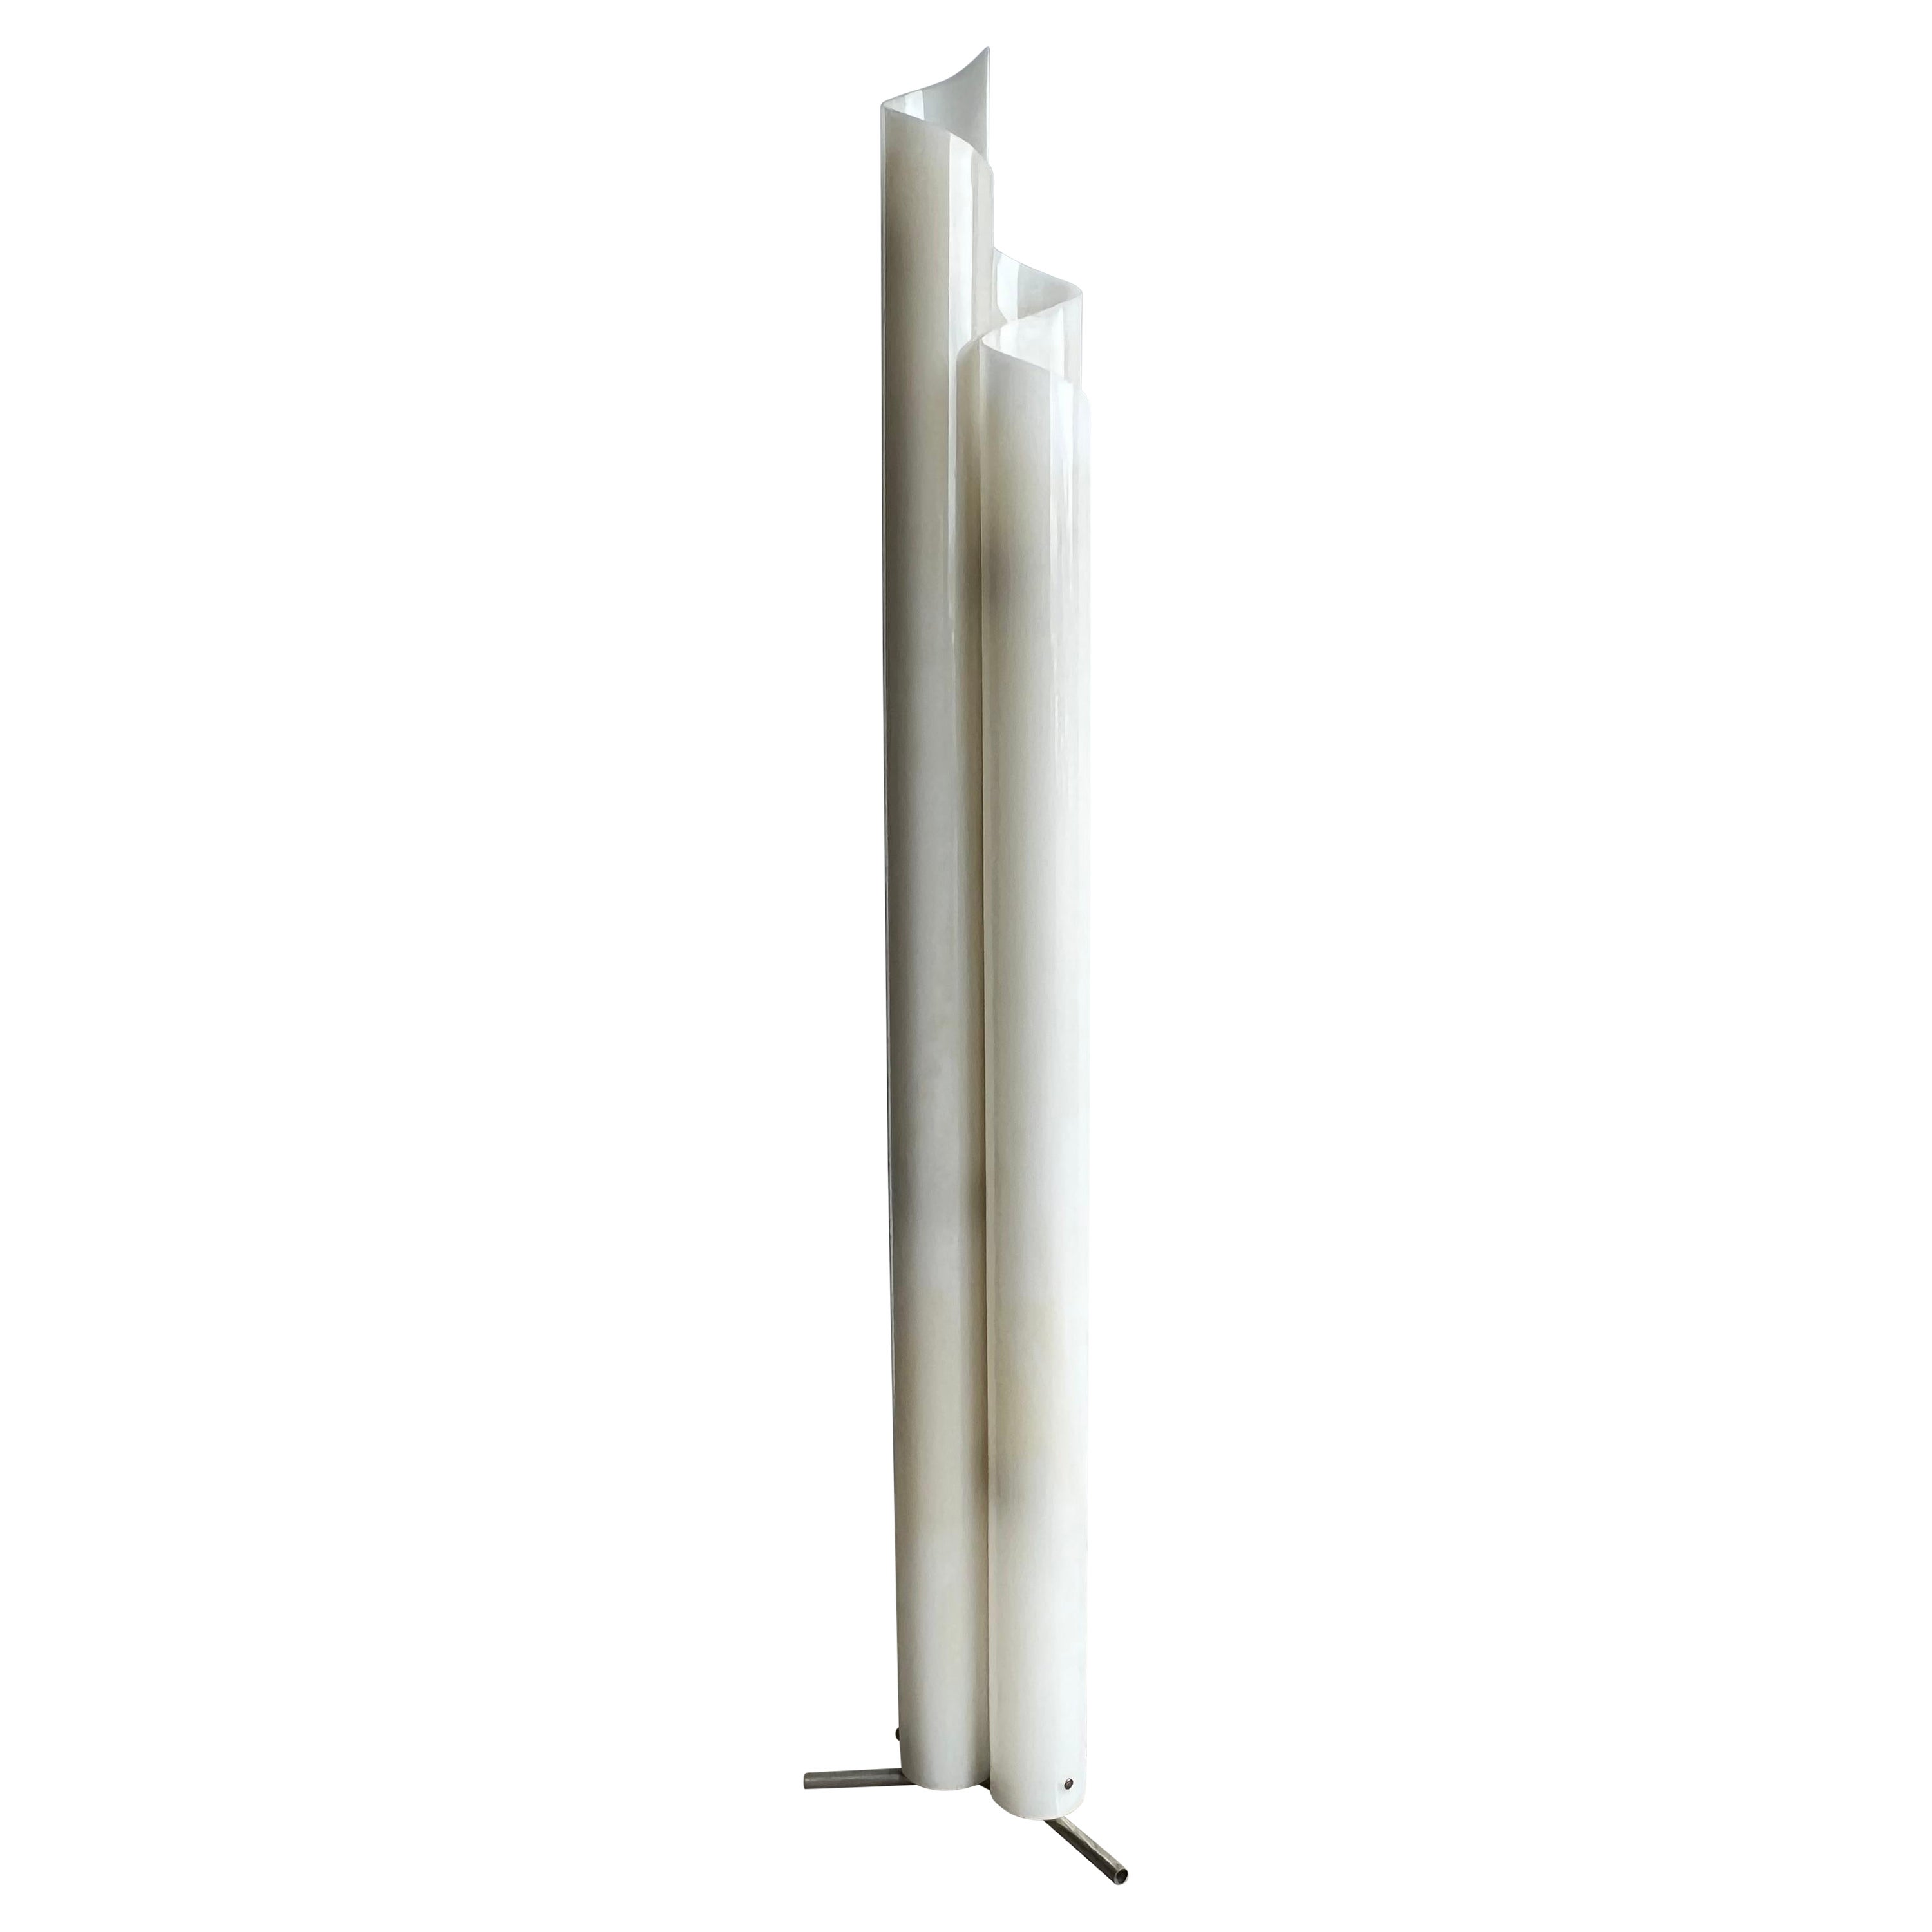 Italian Chimera Floor Lamp by Vico Magistretti for Artemide First Edition, 1969 For Sale